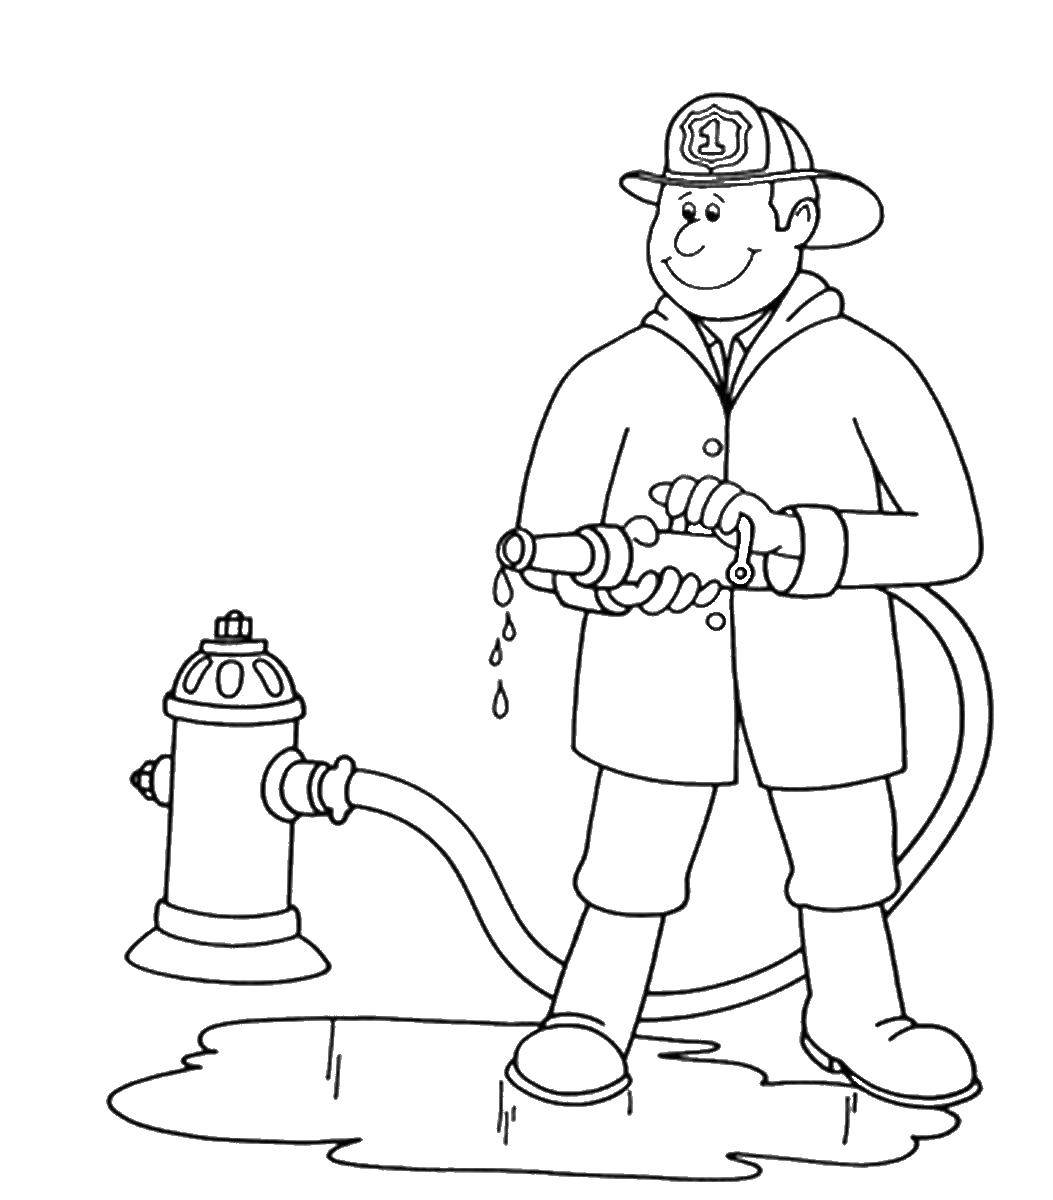 Coloring Fire hose. Category Fire. Tags:  Fire, fire.